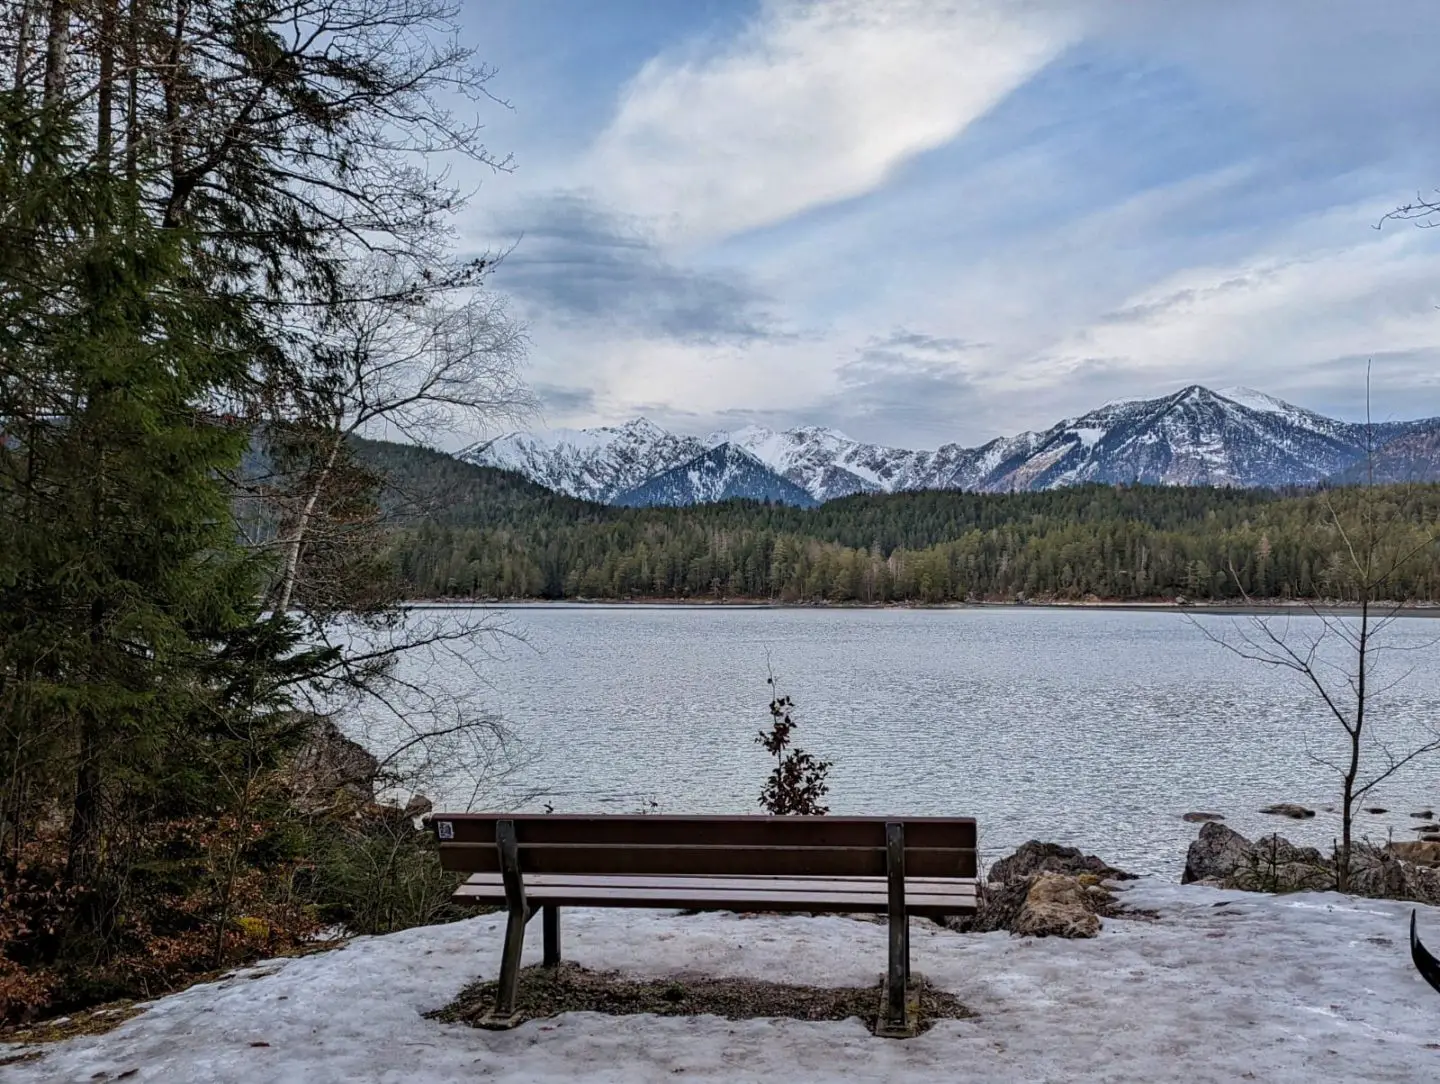 Munich to Eibsee: A Perfect Day Trip